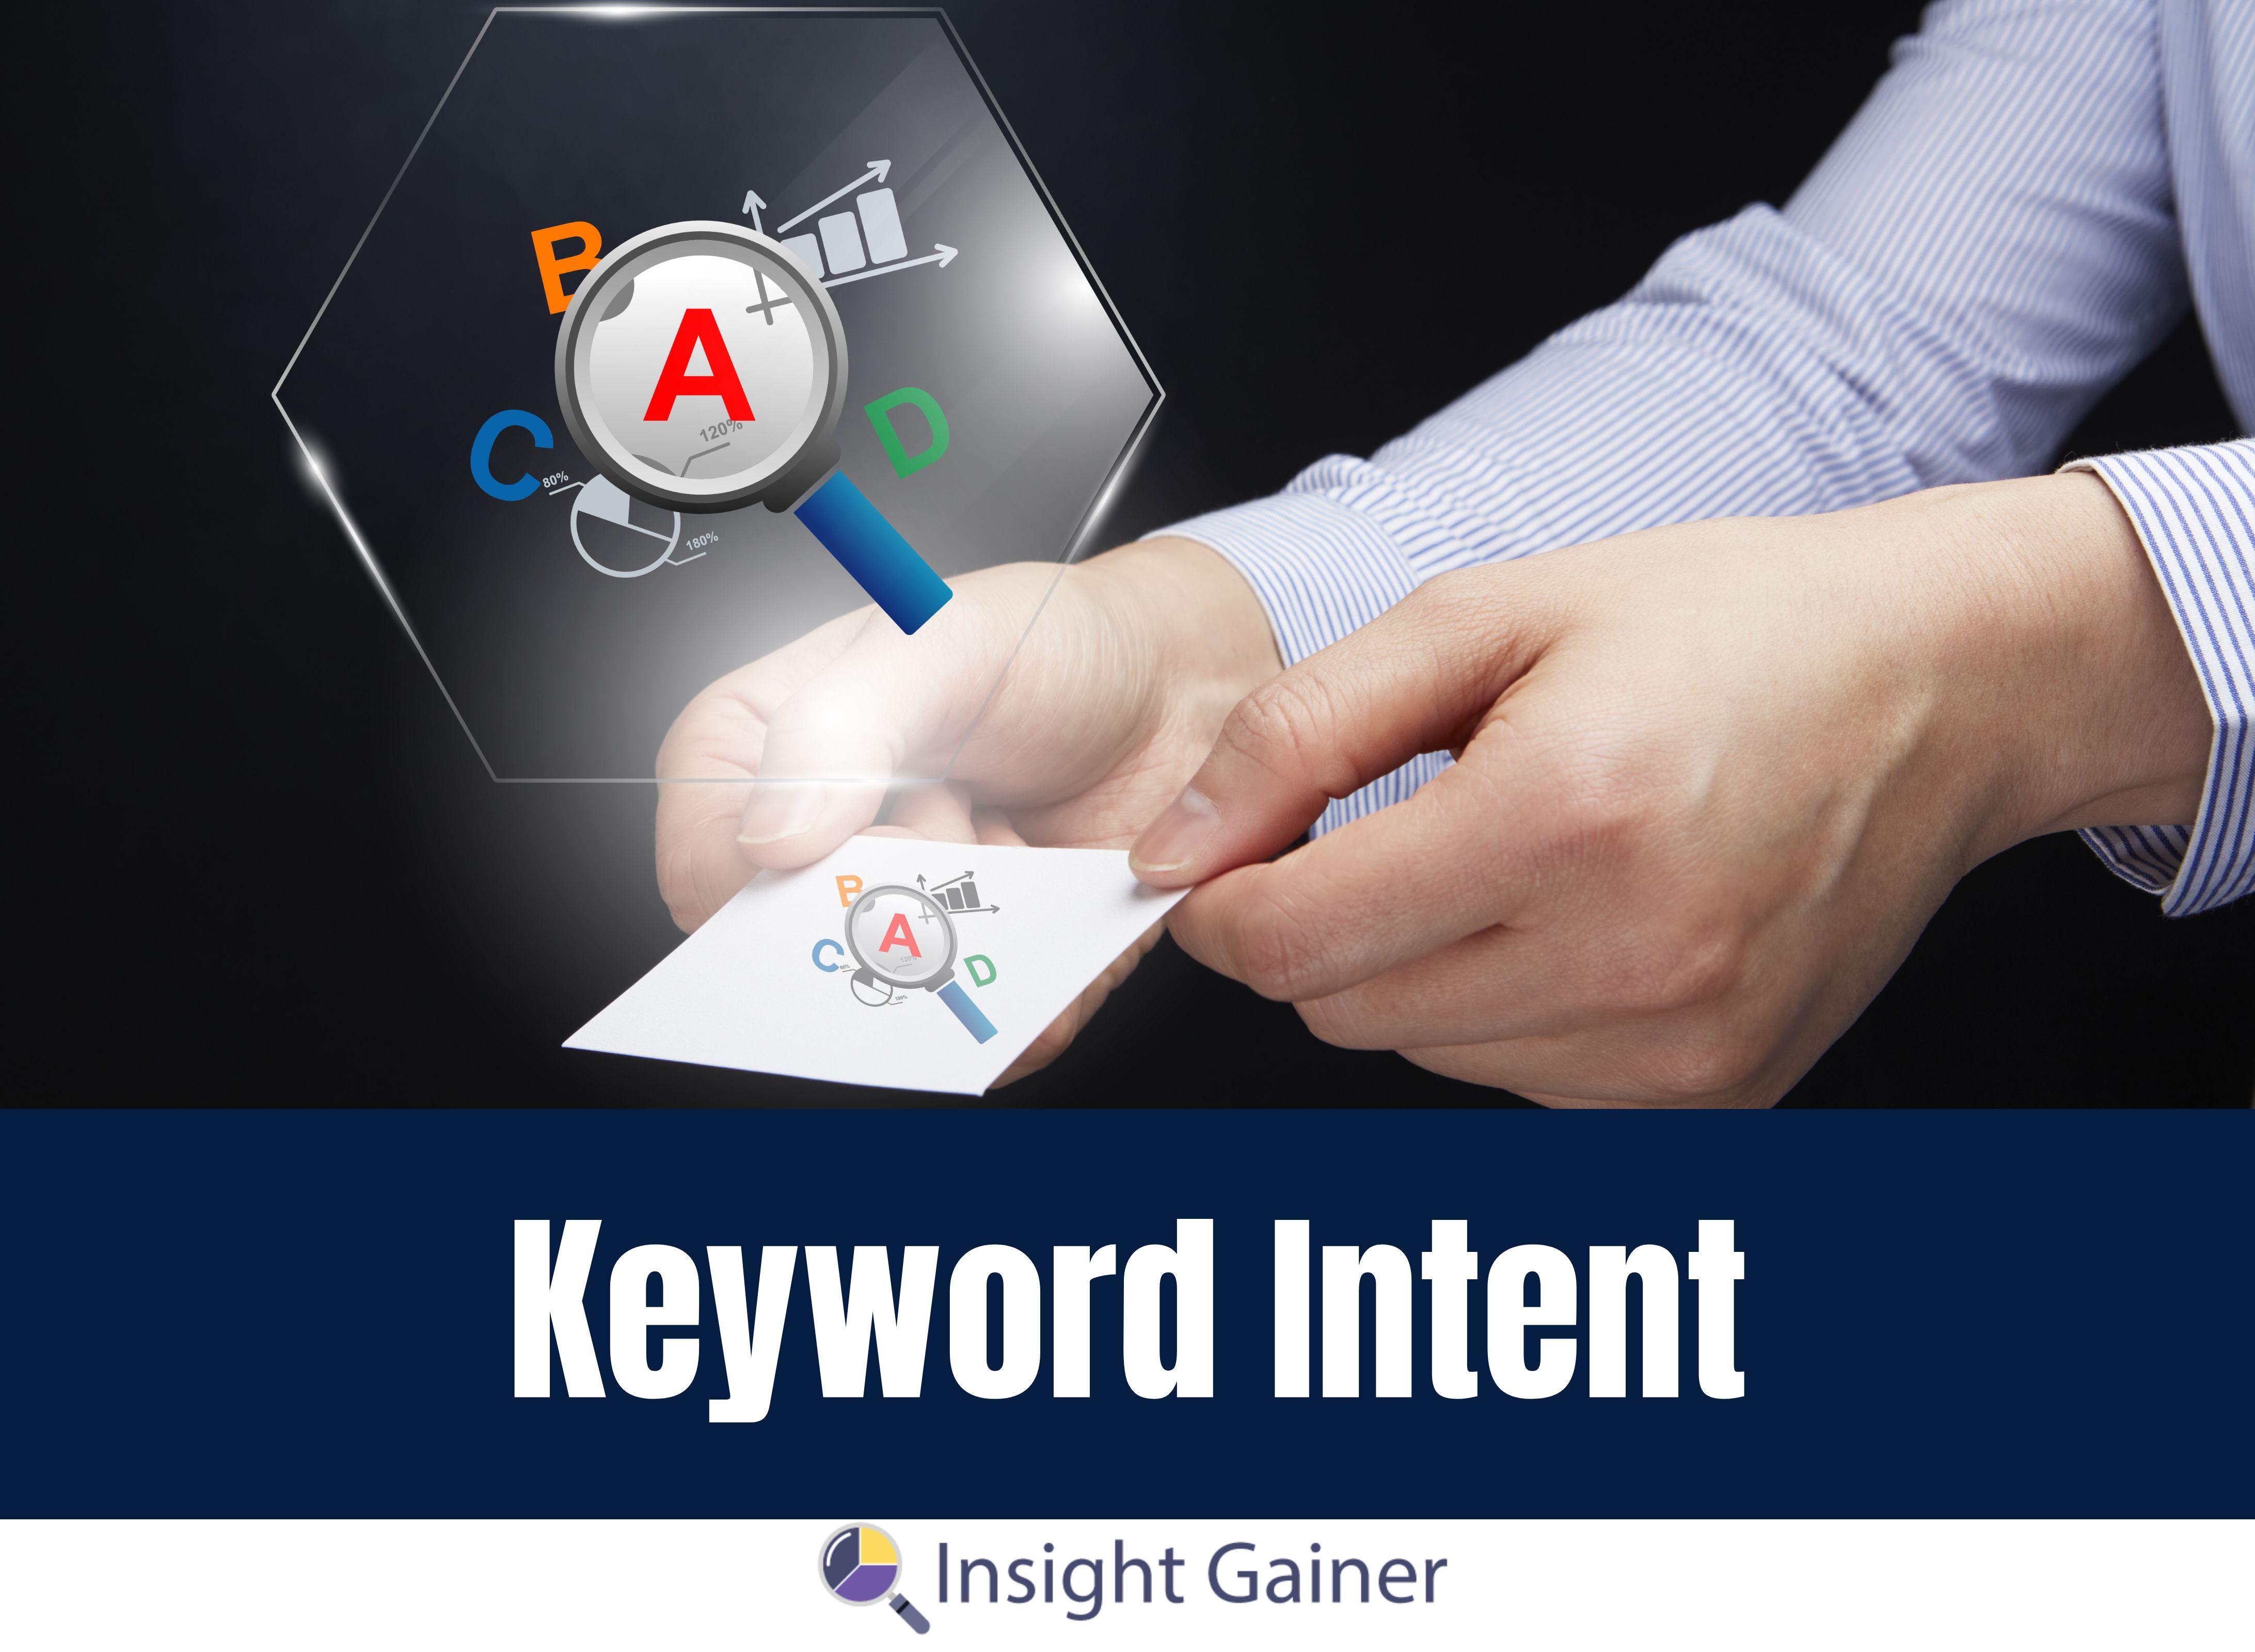 How to Identify Keyword Intent Using Insight Gainer